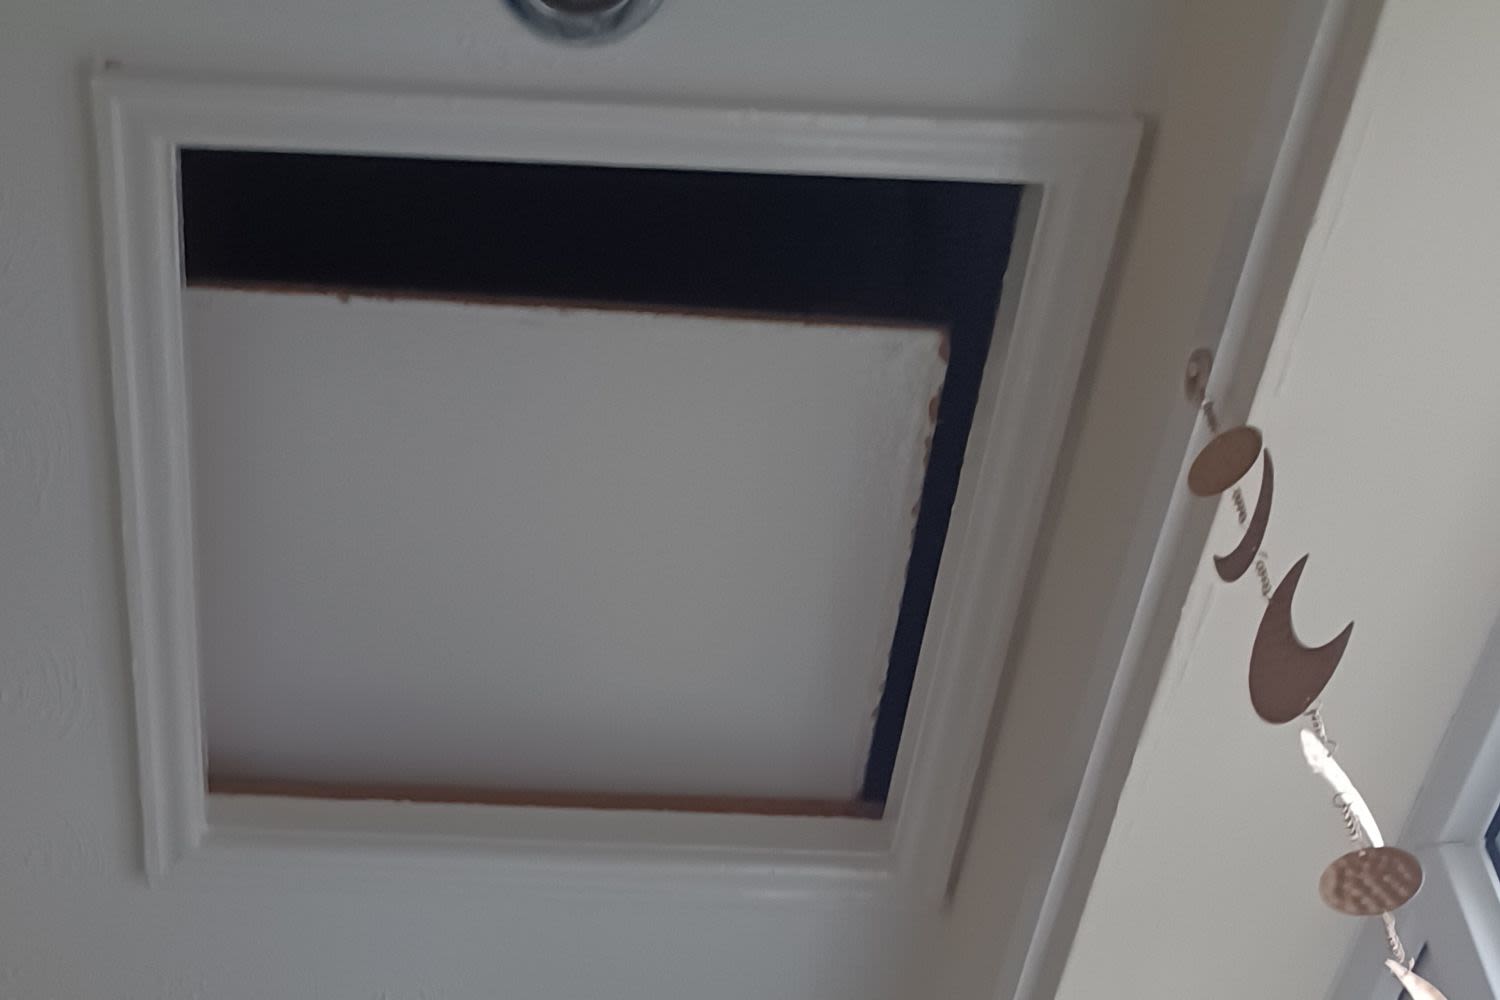 Renter Says Her ‘Heart Sank’ After Returning Home to Find Her Attic Door Mysteriously Open: ‘There Is Someone...